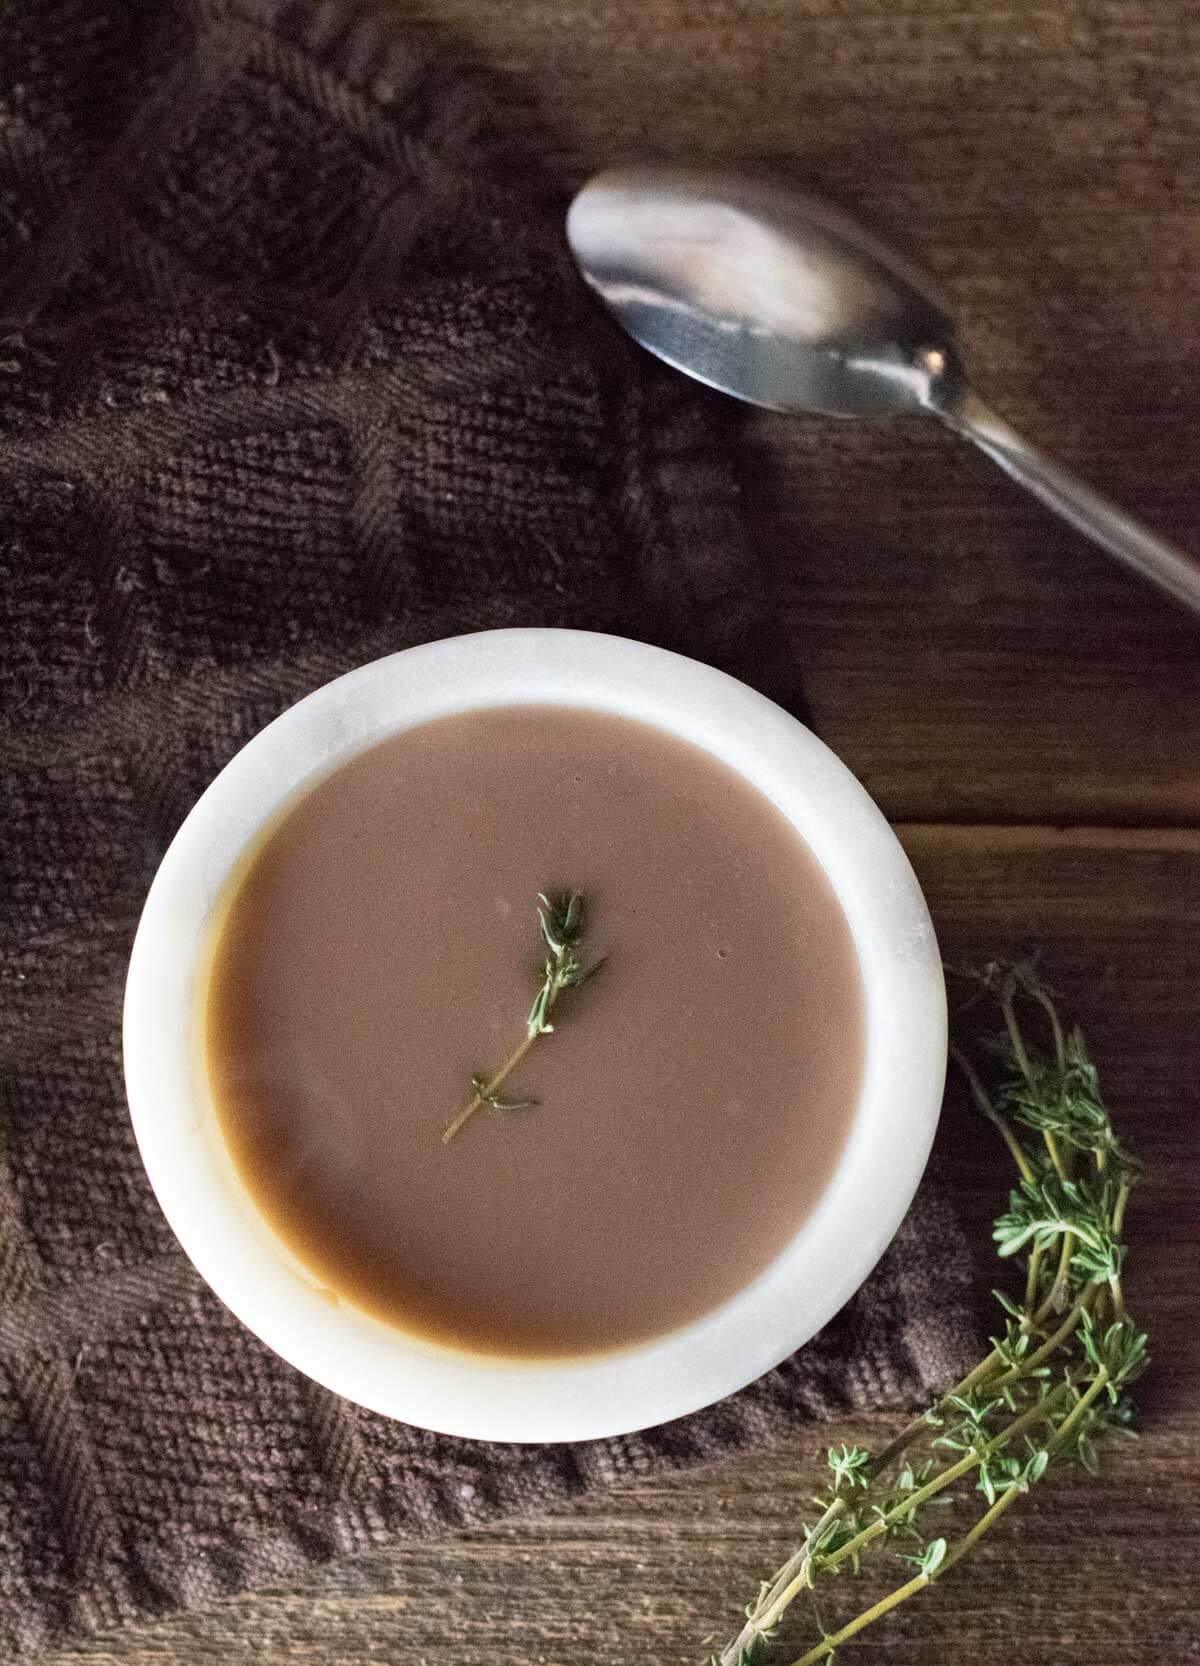 Homemade gravy in a bowl with sprig of thyme.